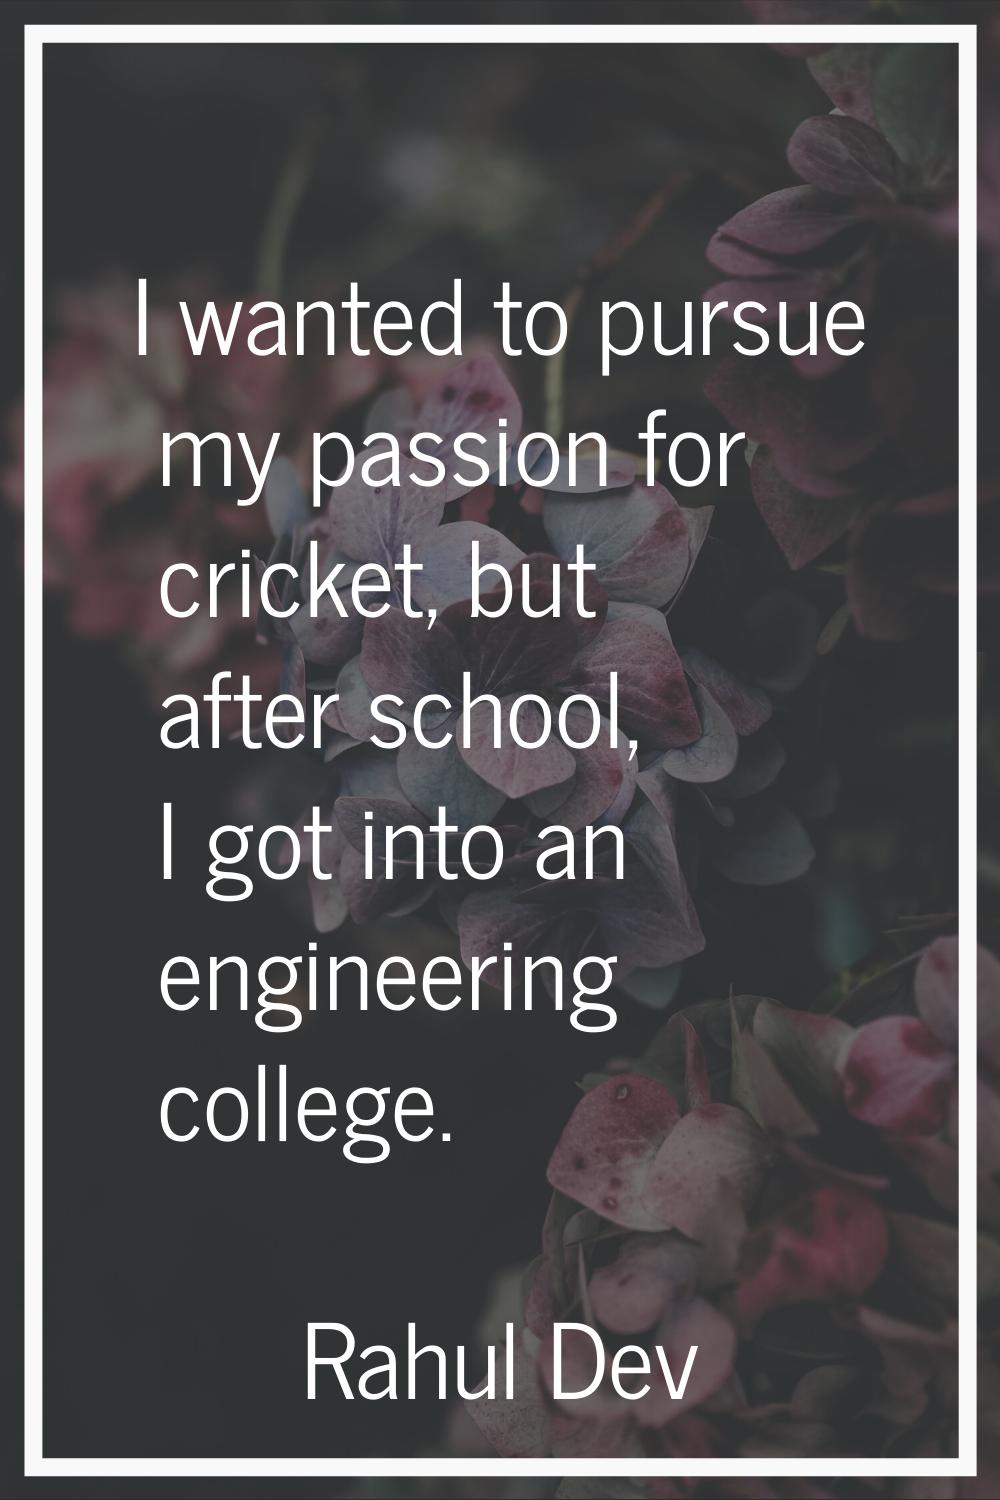 I wanted to pursue my passion for cricket, but after school, I got into an engineering college.